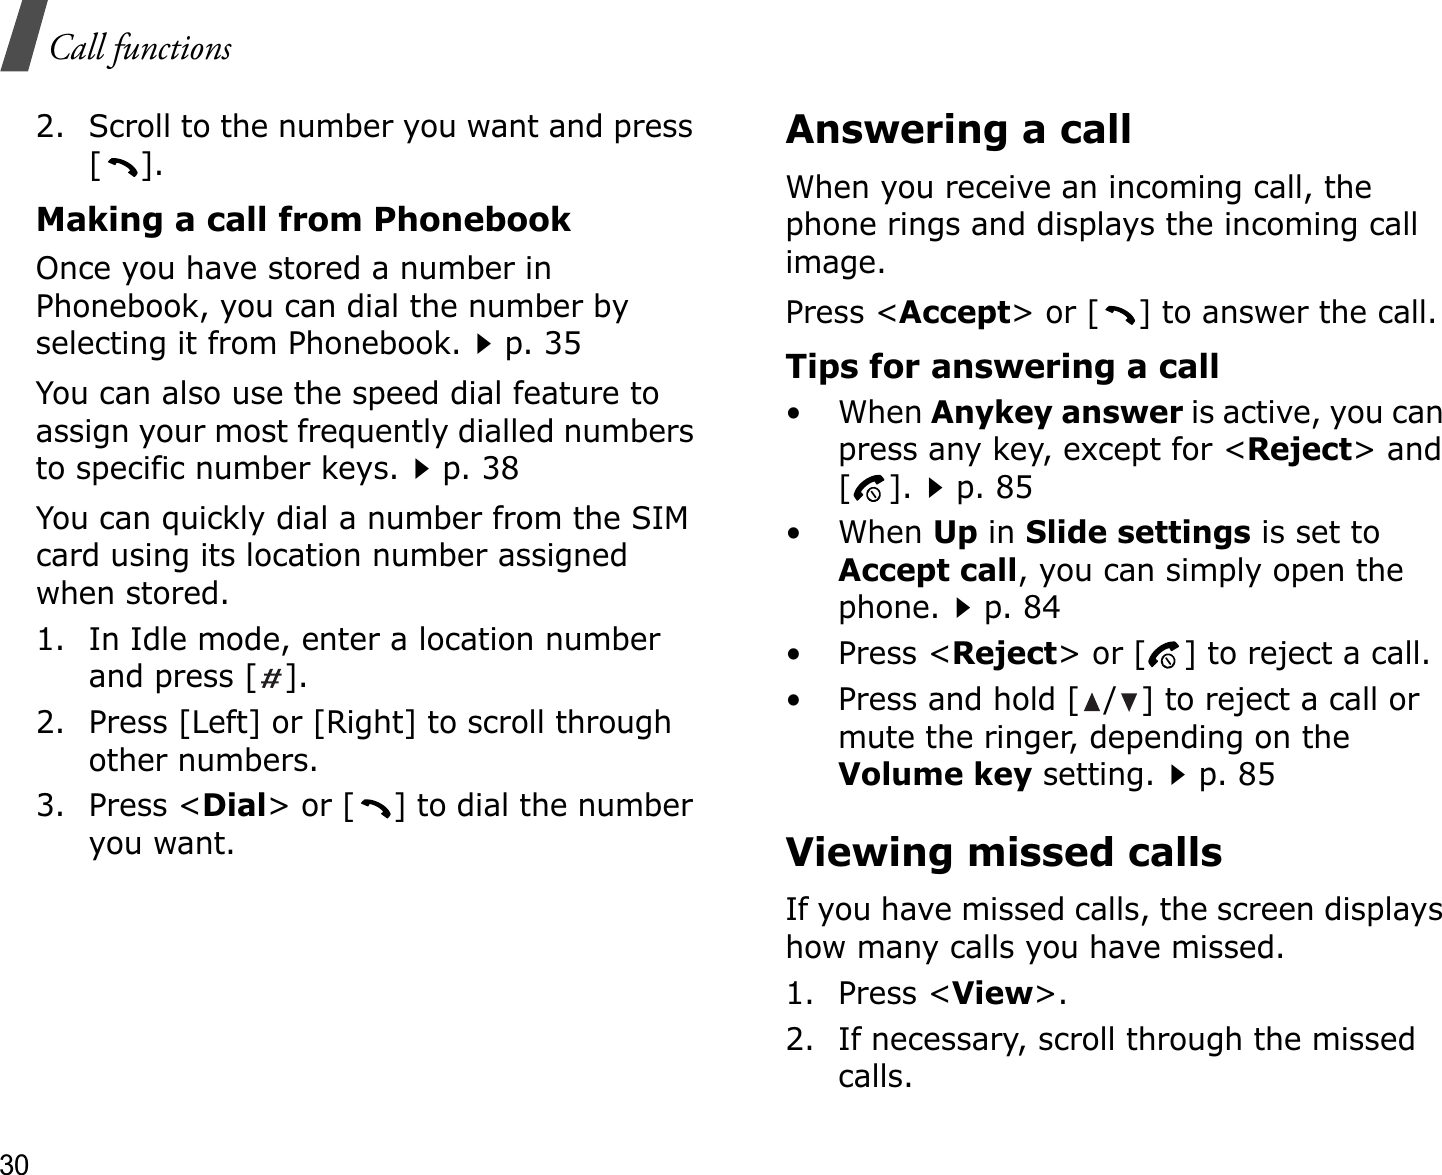 30Call functions2. Scroll to the number you want and press [].Making a call from PhonebookOnce you have stored a number in Phonebook, you can dial the number by selecting it from Phonebook.p. 35You can also use the speed dial feature to assign your most frequently dialled numbers to specific number keys.p. 38You can quickly dial a number from the SIM card using its location number assigned when stored.1. In Idle mode, enter a location number and press [ ].2. Press [Left] or [Right] to scroll through other numbers.3. Press &lt;Dial&gt; or [ ] to dial the number you want.Answering a callWhen you receive an incoming call, the phone rings and displays the incoming call image. Press &lt;Accept&gt; or [ ] to answer the call.Tips for answering a call• When Anykey answer is active, you can press any key, except for &lt;Reject&gt; and [].p. 85• When Up in Slide settings is set to Accept call, you can simply open the phone.p. 84•Press &lt;Reject&gt; or [ ] to reject a call.• Press and hold [ / ] to reject a call or mute the ringer, depending on the Volume key setting.p. 85Viewing missed callsIf you have missed calls, the screen displays how many calls you have missed.1. Press &lt;View&gt;.2. If necessary, scroll through the missed calls.